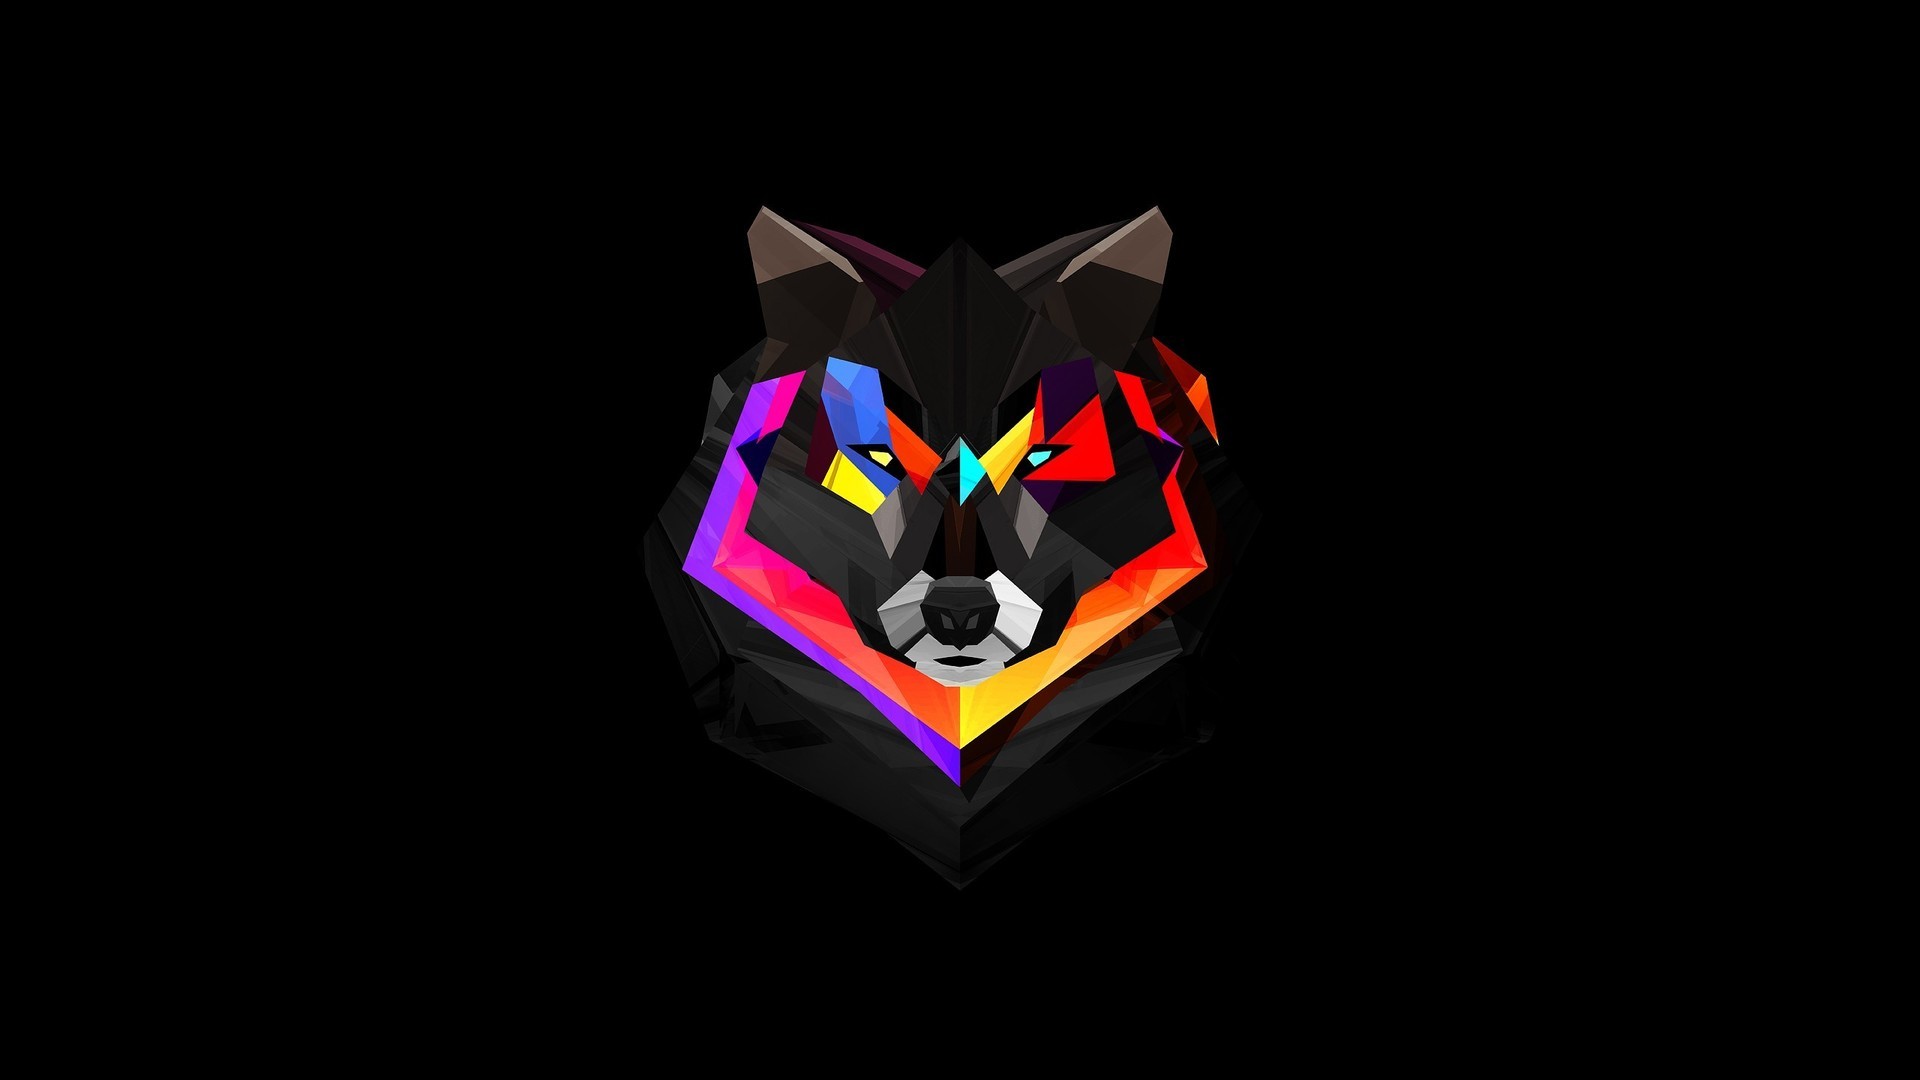 General 2560×1440 abstract wolf Photos Pinterest High quality wallpapers and Wallpaper